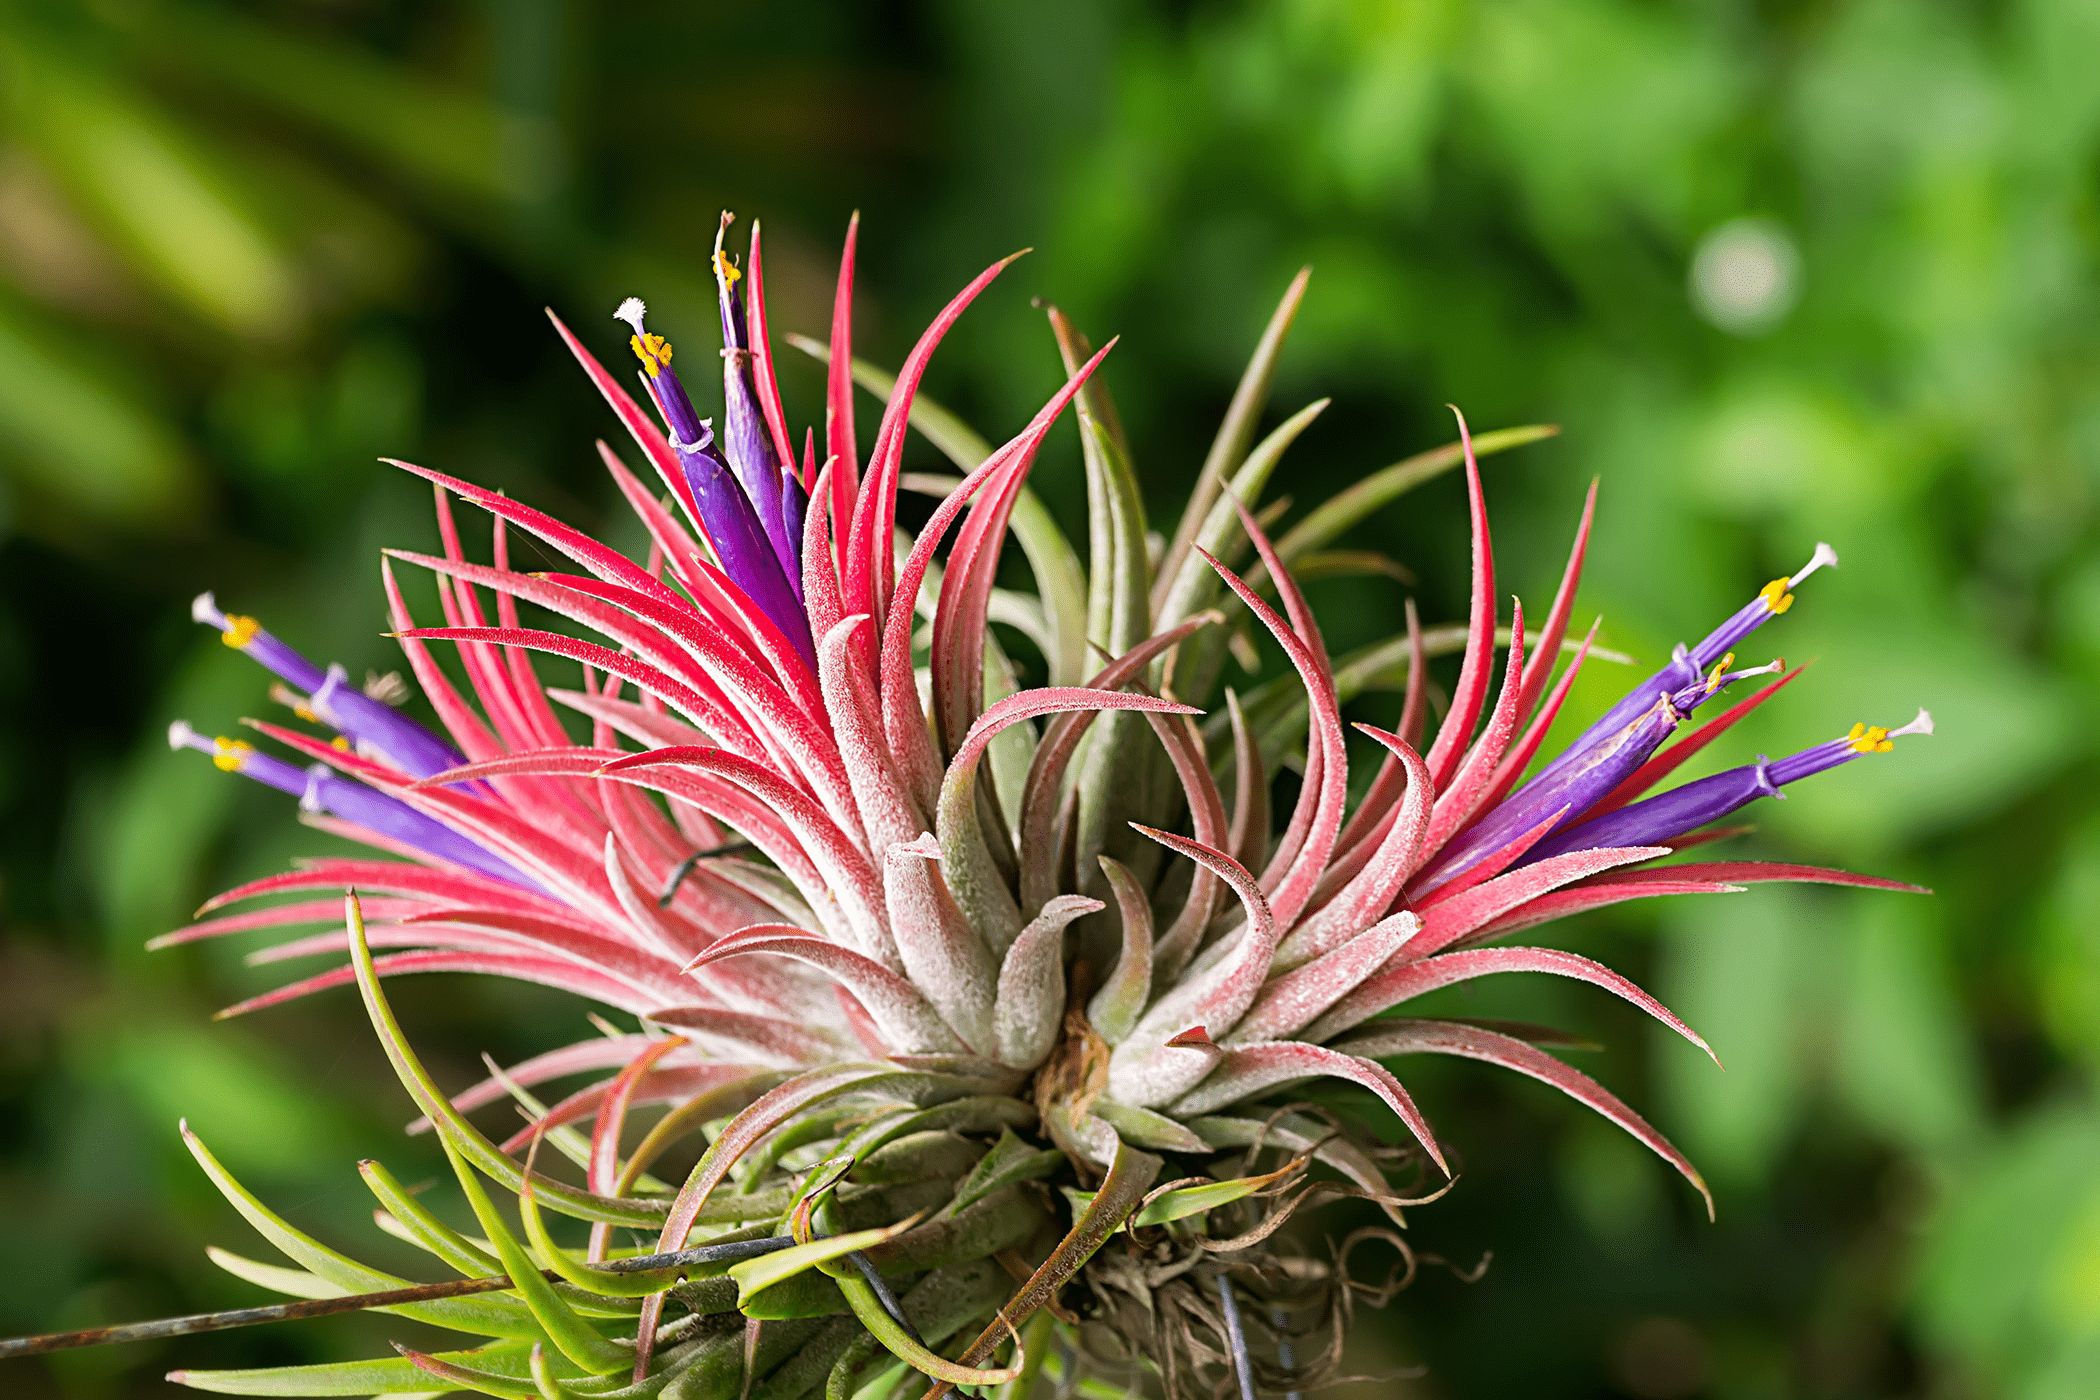 Close up of a brightly colored air plant